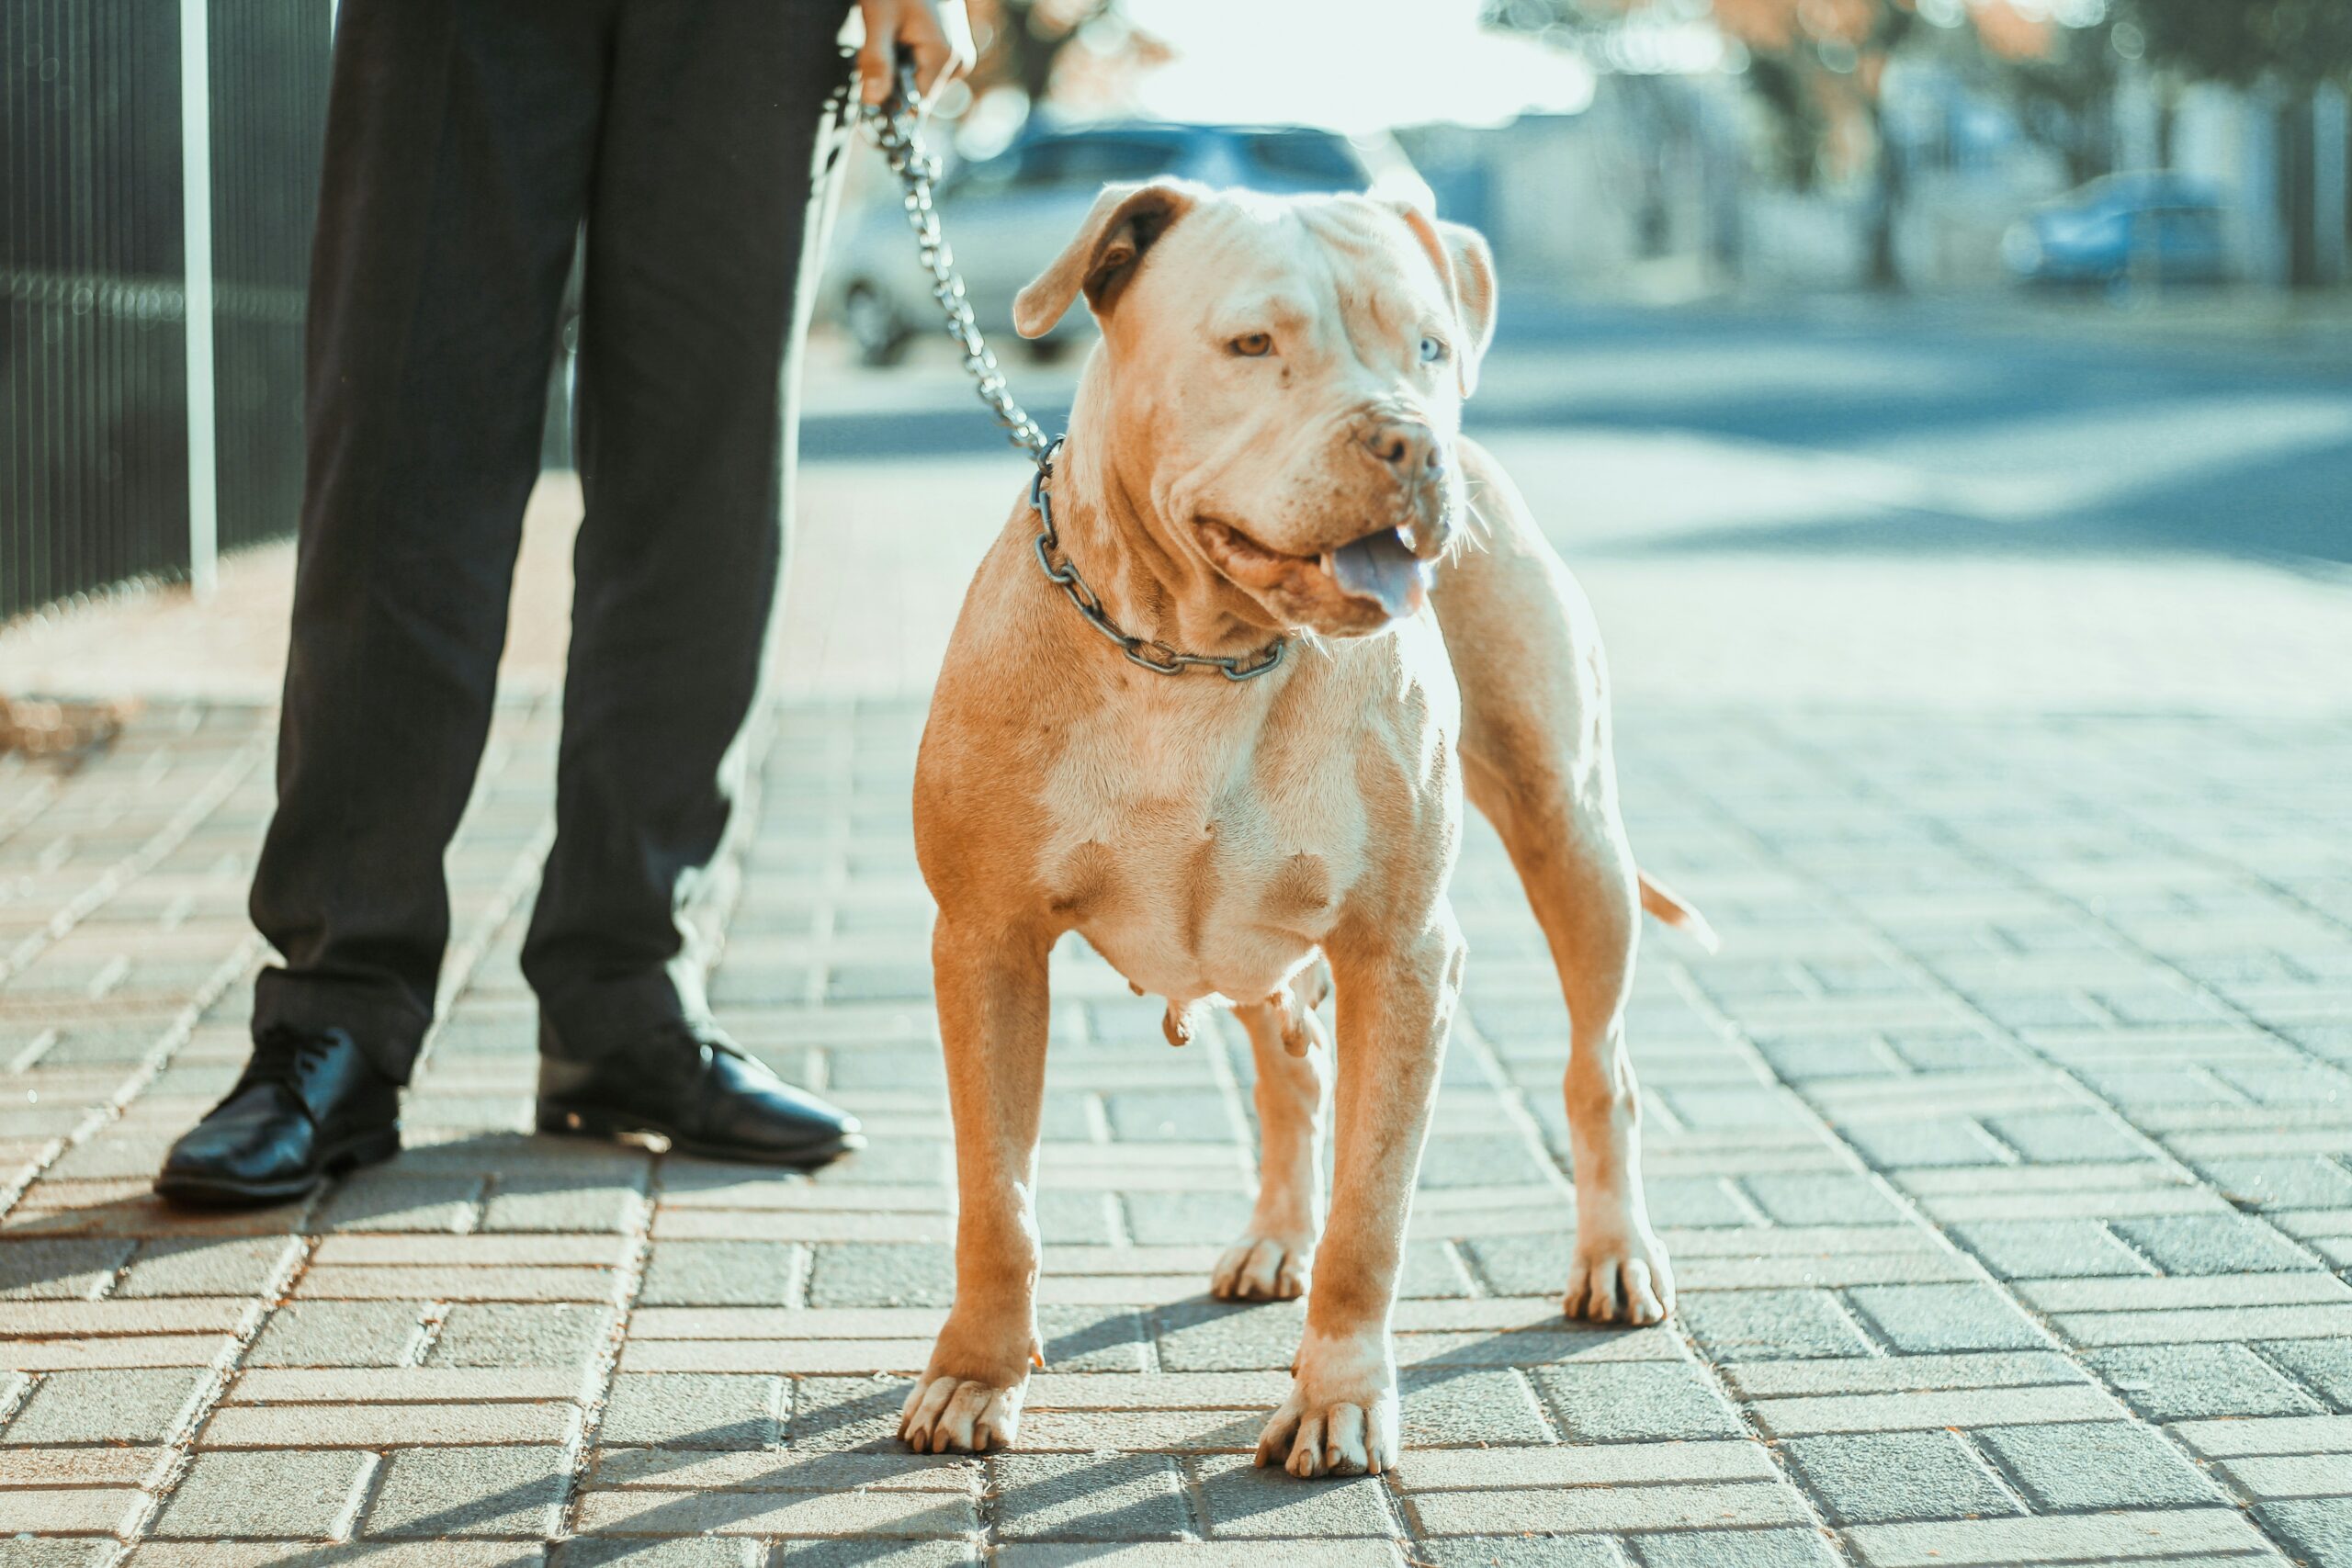 Pitbulls are strong and resilient. They do not give up easily, which can be really inspiring for people facing tough challenges. Seeing the determination of these dogs can remind people of their own inner strength and encourage them to overcome their struggles. They can be excellent in providing mental support.